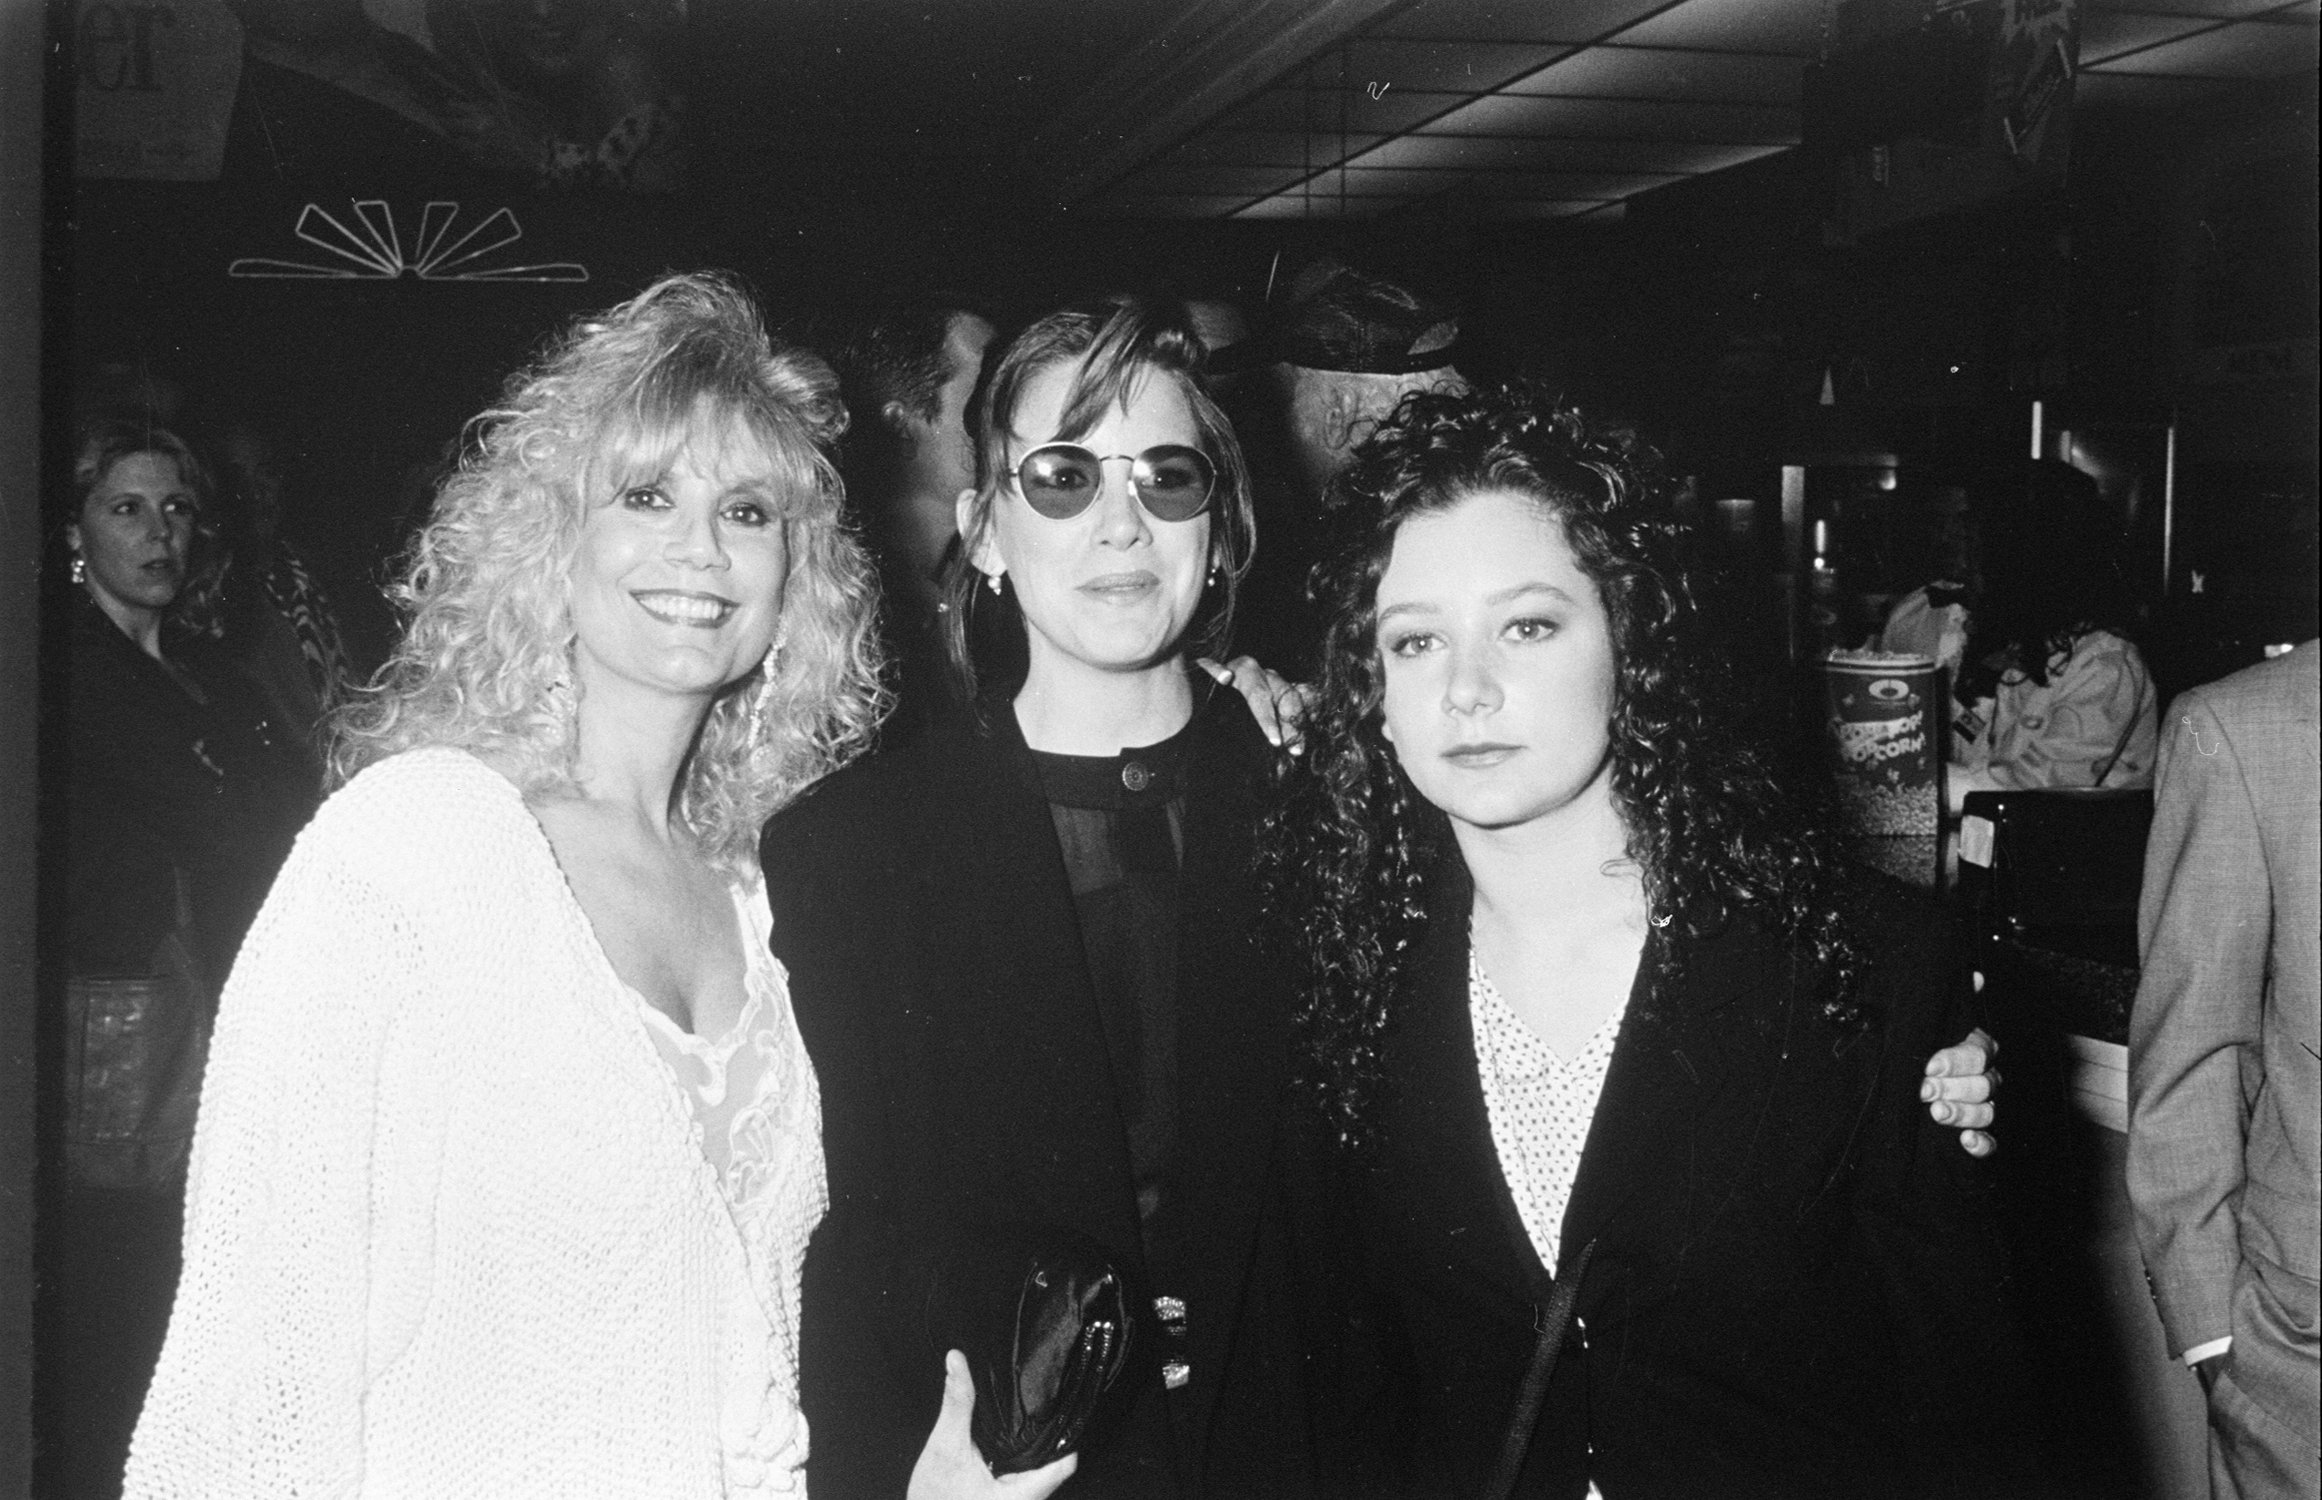 Barbara Crane (later Cowan), Melissa Gilbert, Sara Gilbert huddle together at an event, photographed in black and white. 